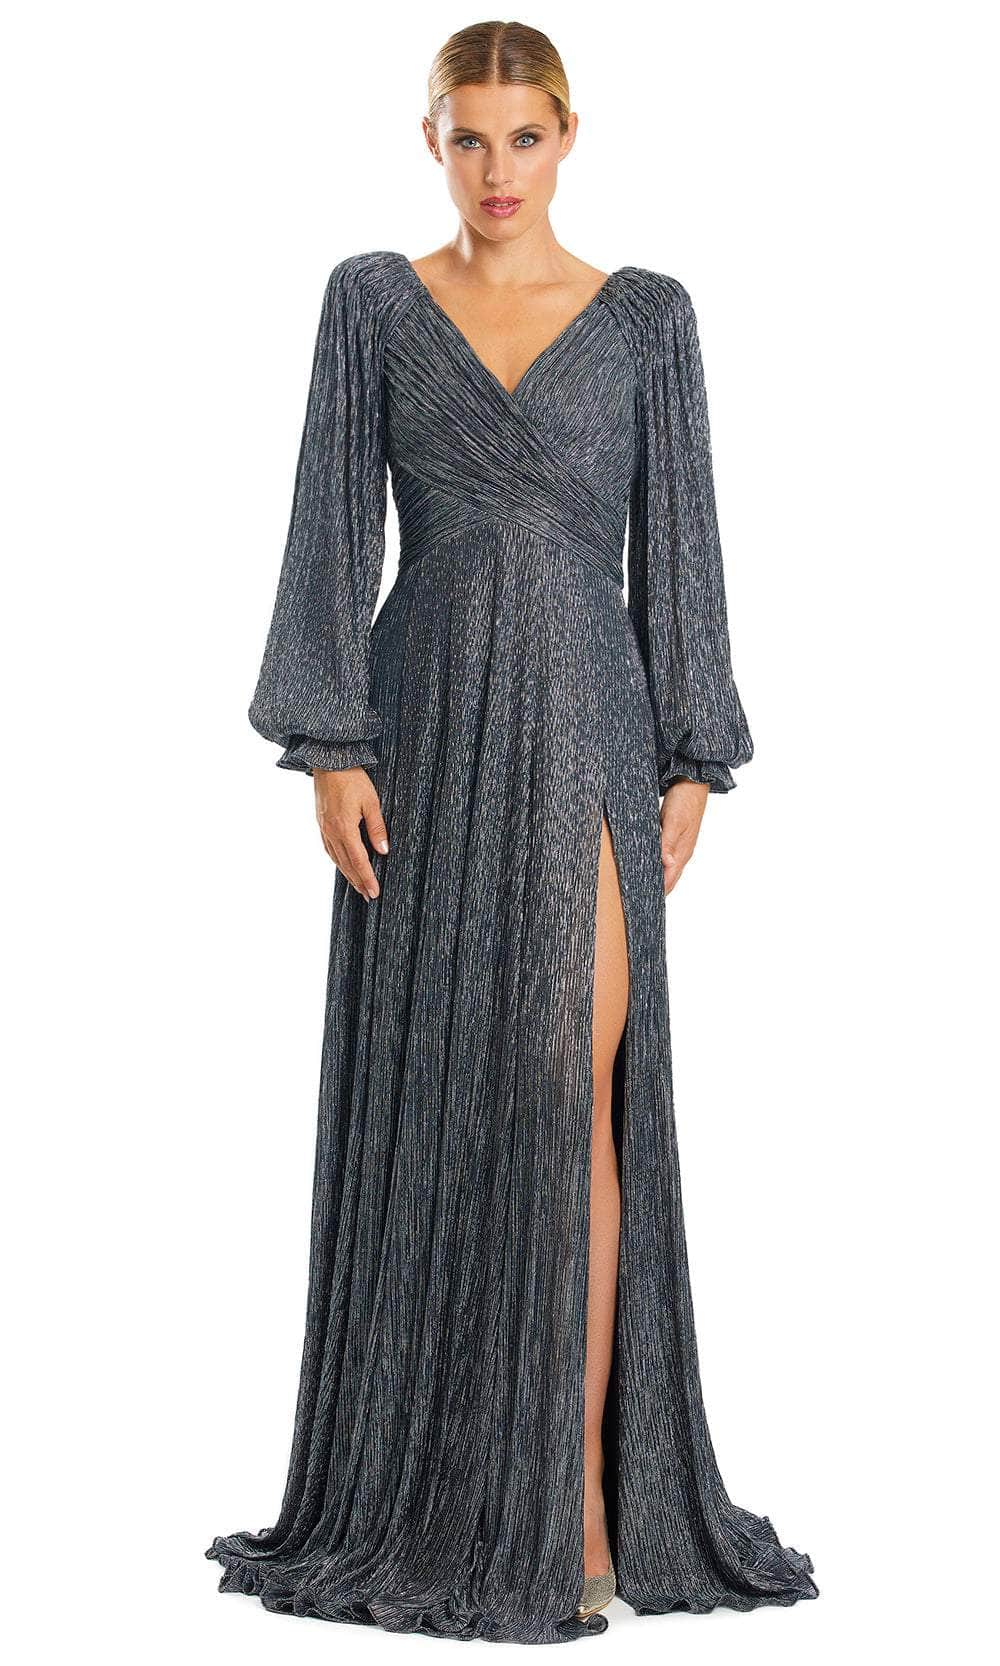 Alexander by Daymor 1877F23 - Long Sleeve Ruched Evening Gown
